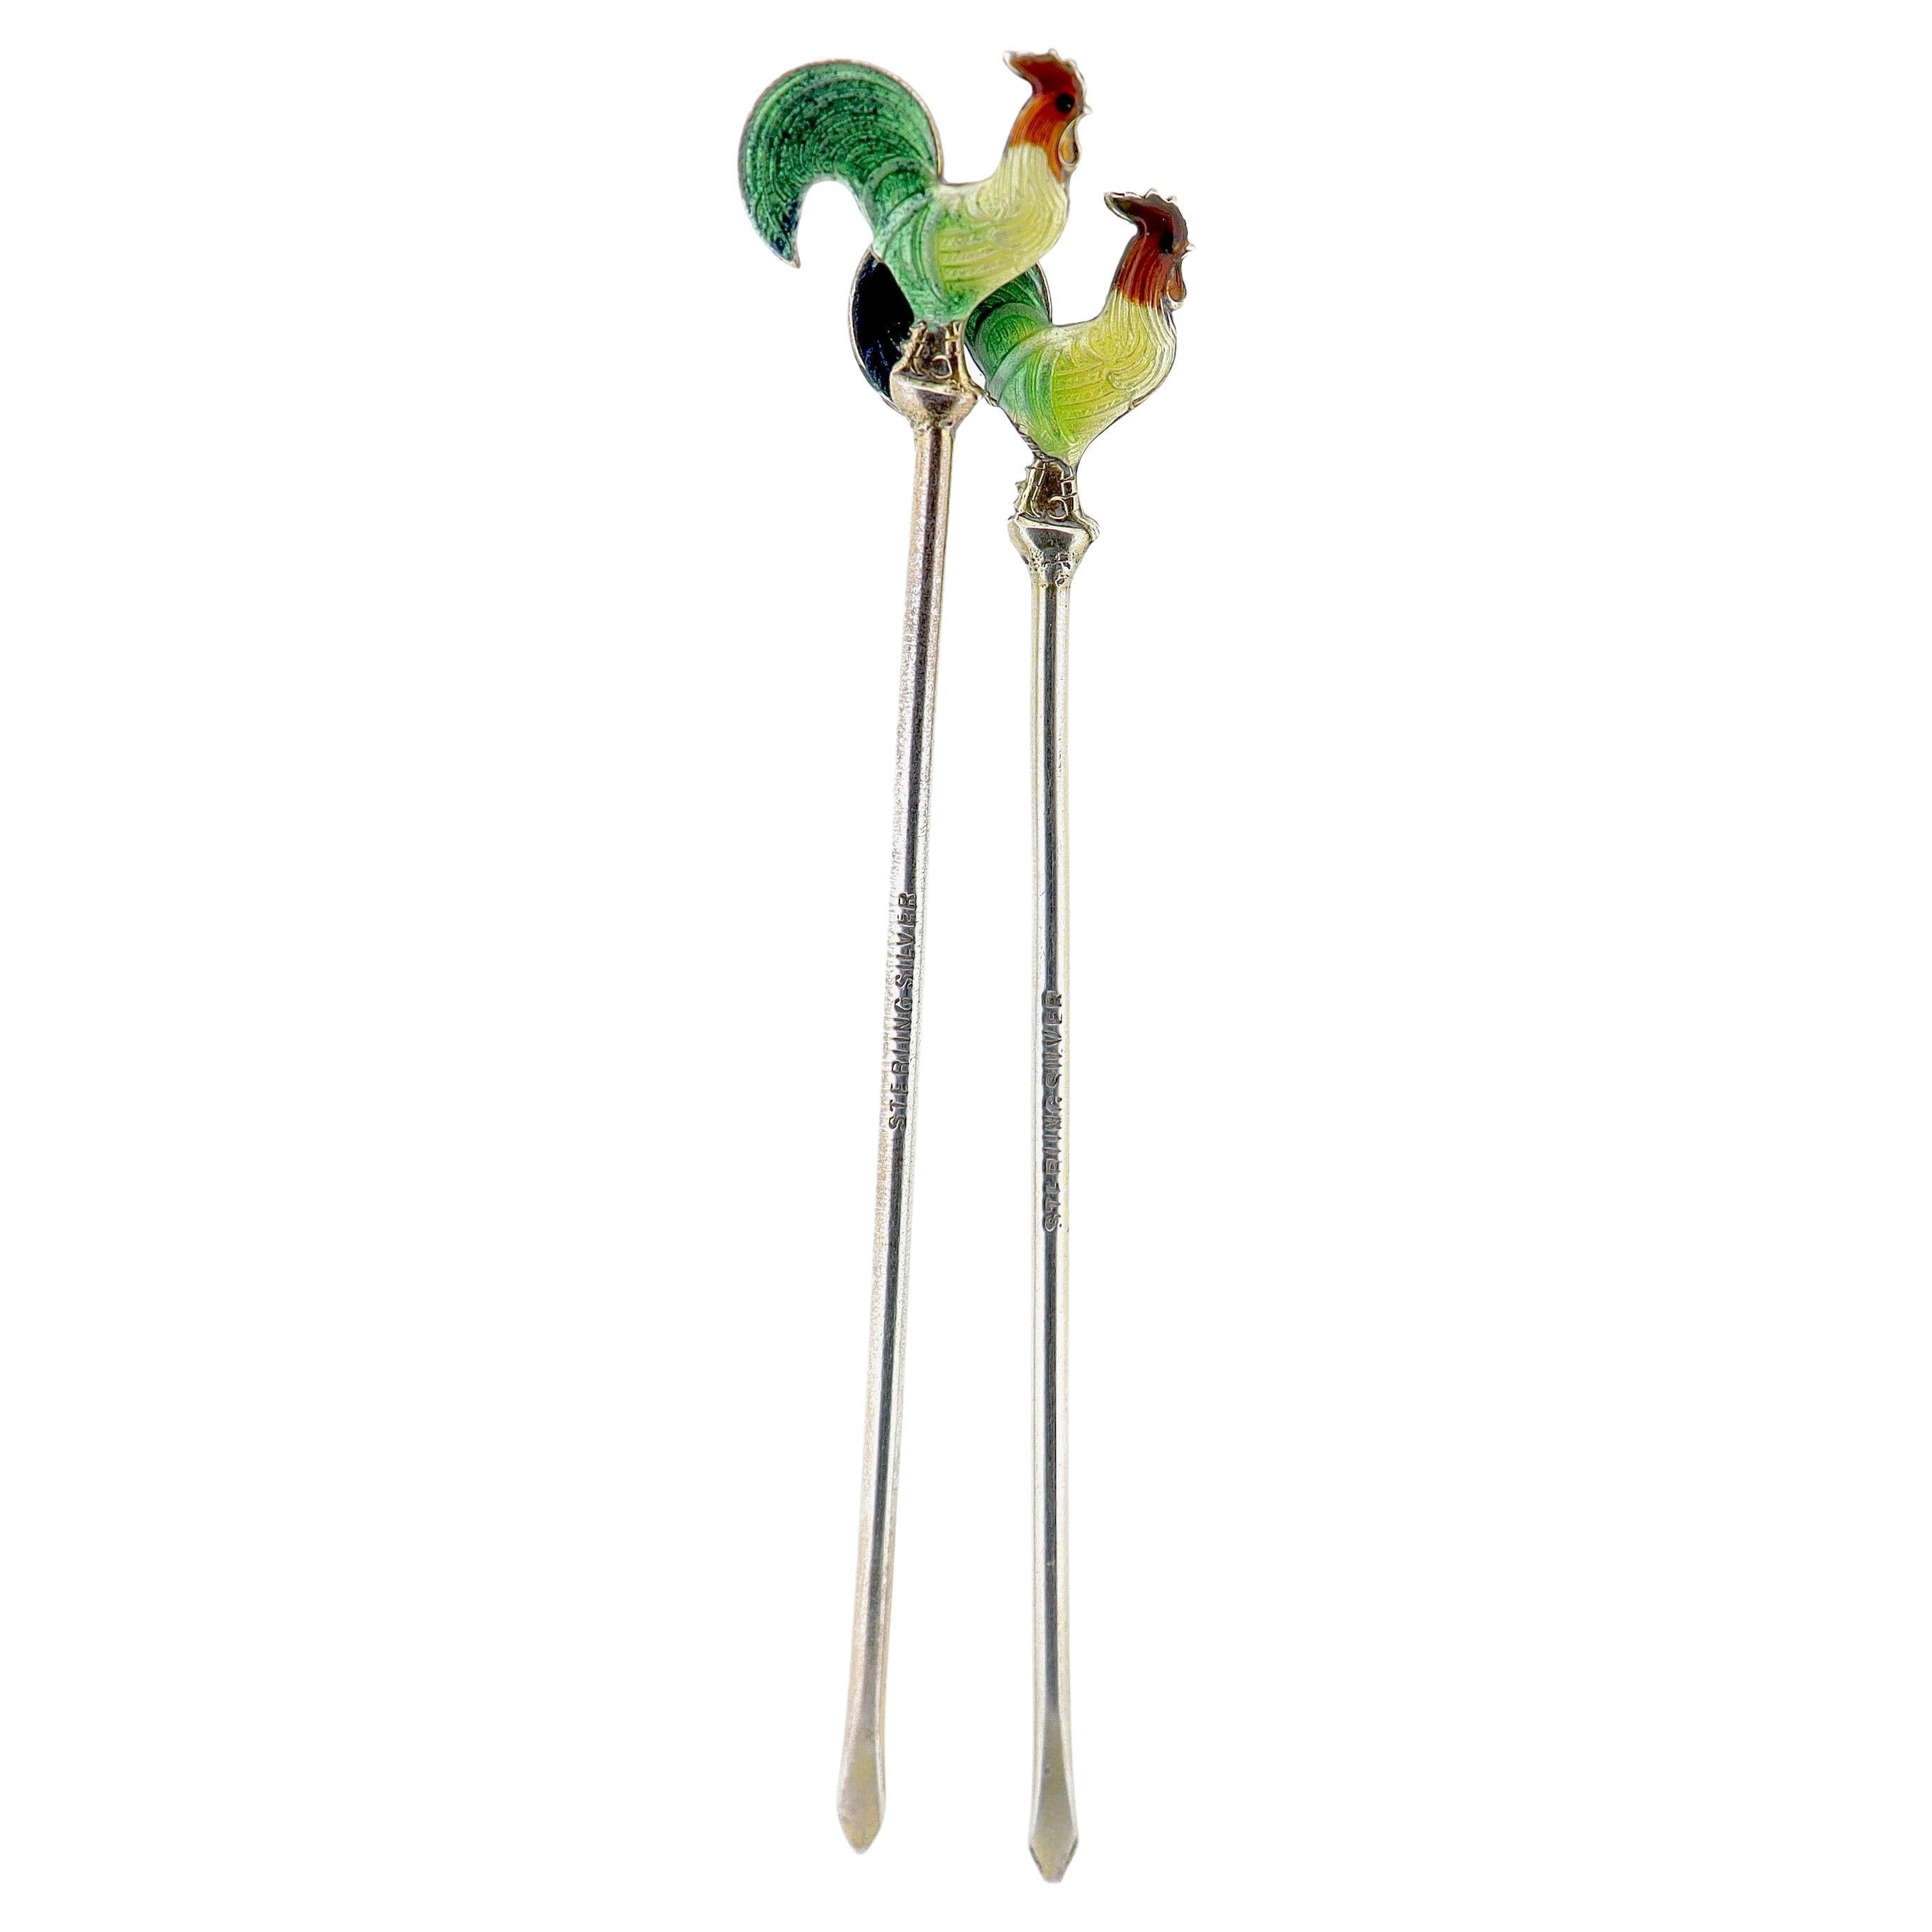 A fine pair of Mid-century Modern cocktail picks.

In sterling silver with enamel and traces of gilding. 

Simply a great pair of cocktail picks for you and your favorite friend!

Date:
Mid-20th Century

Overall Condition:
It is in overall good,